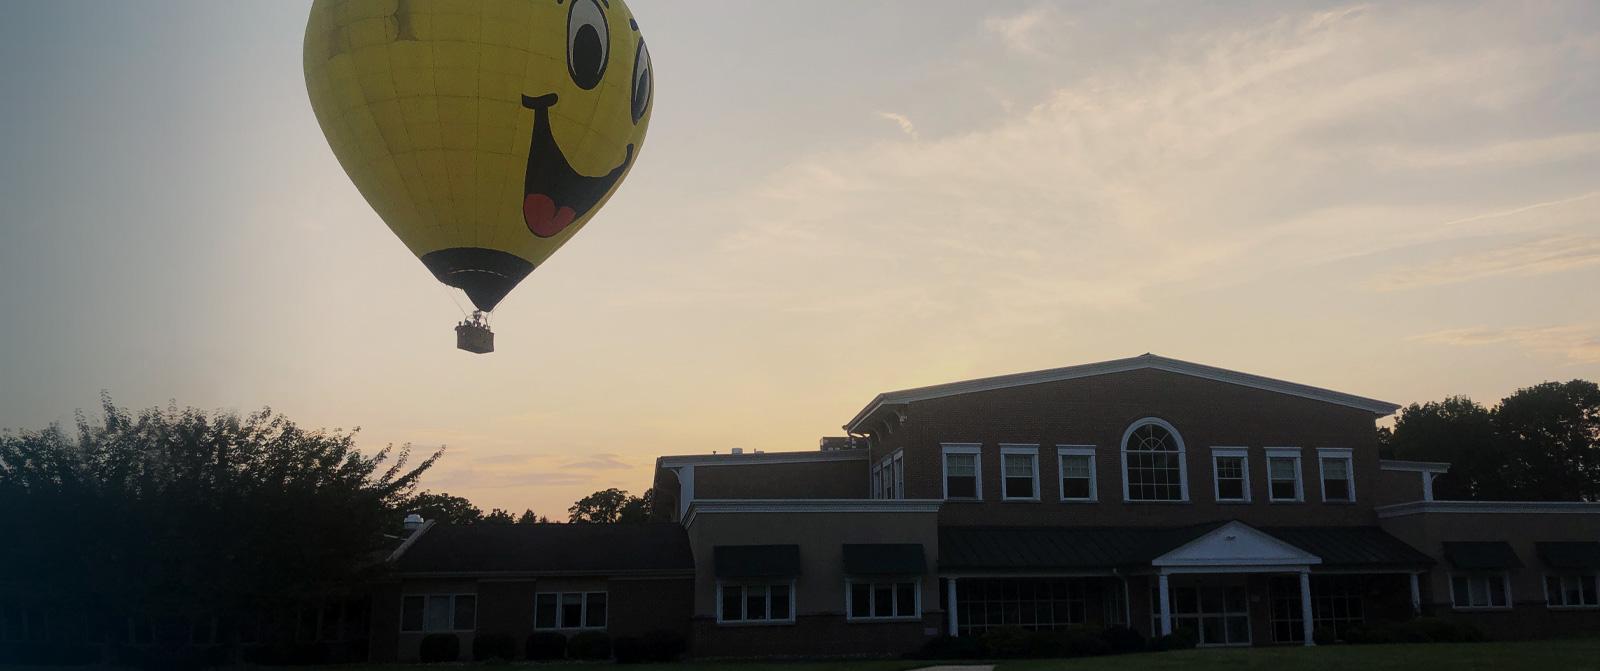 Hot air baloon rides on the Midland campus